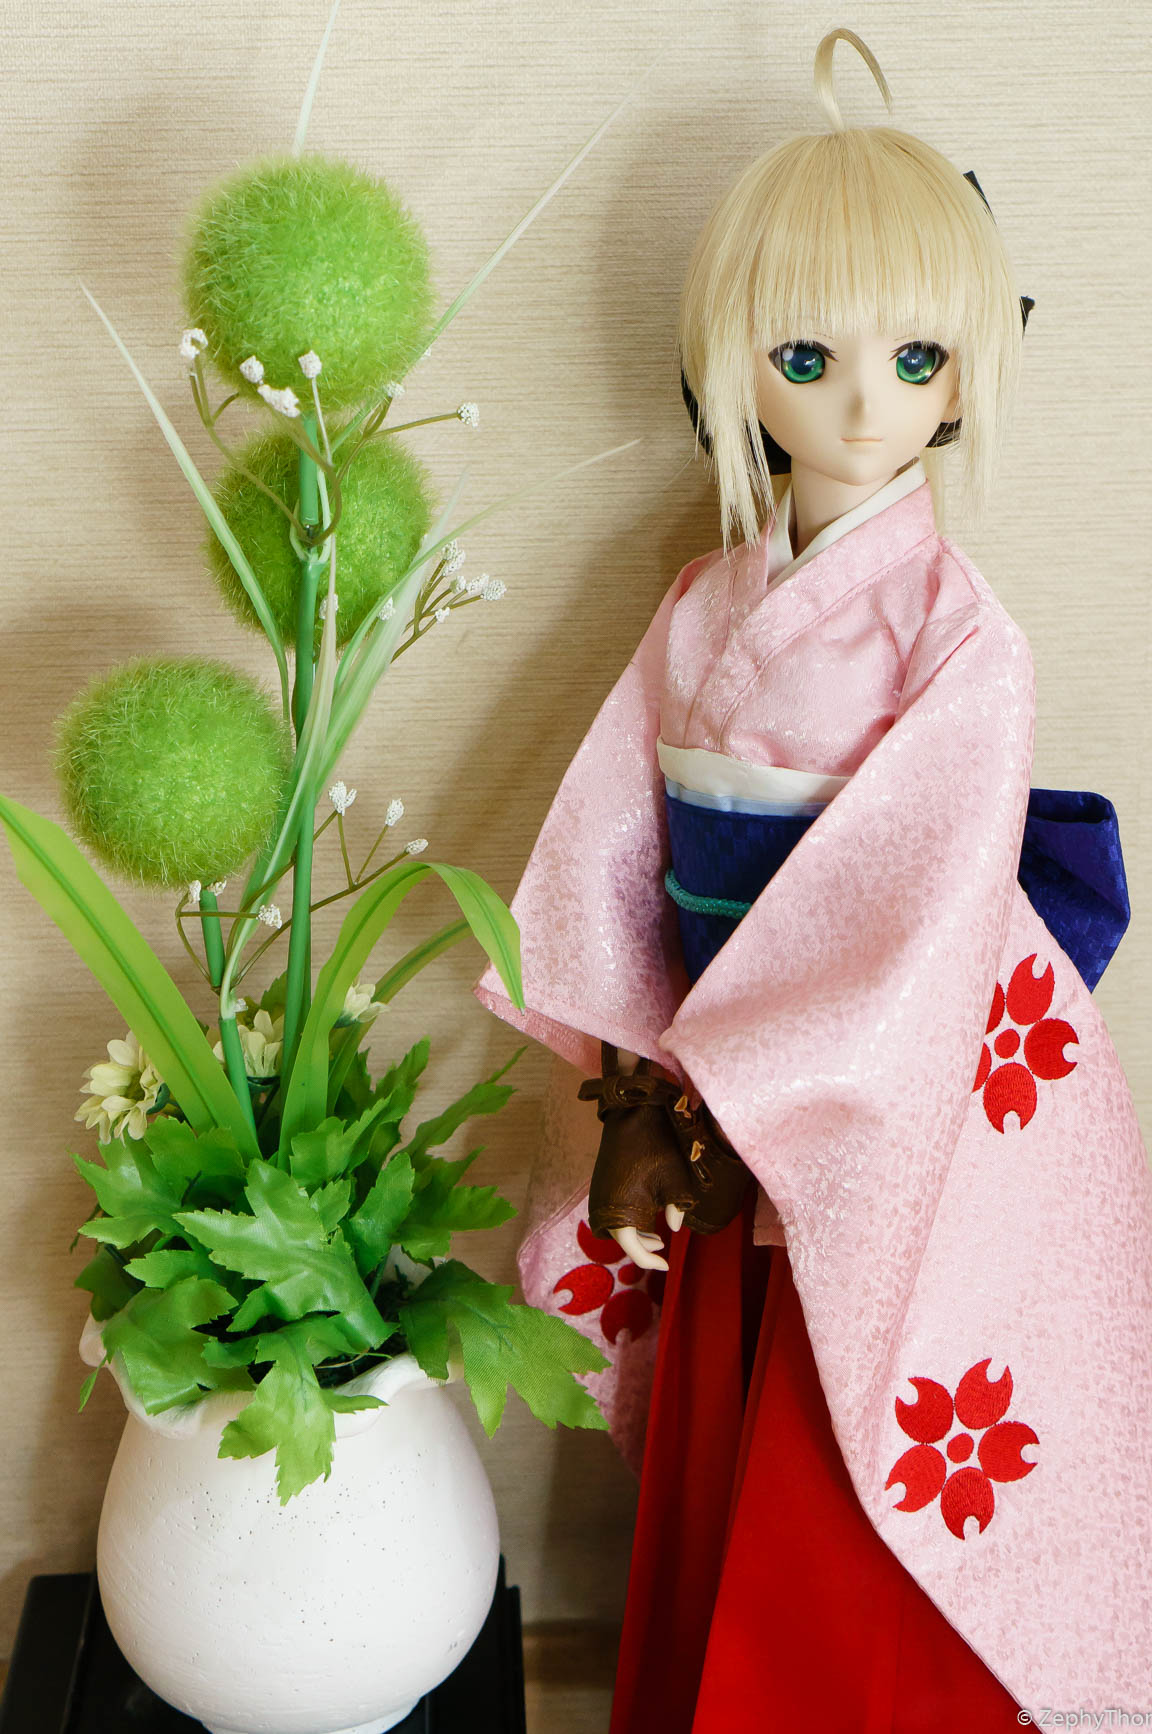 a doll dressed in an oriental fashion next to a vase with plants